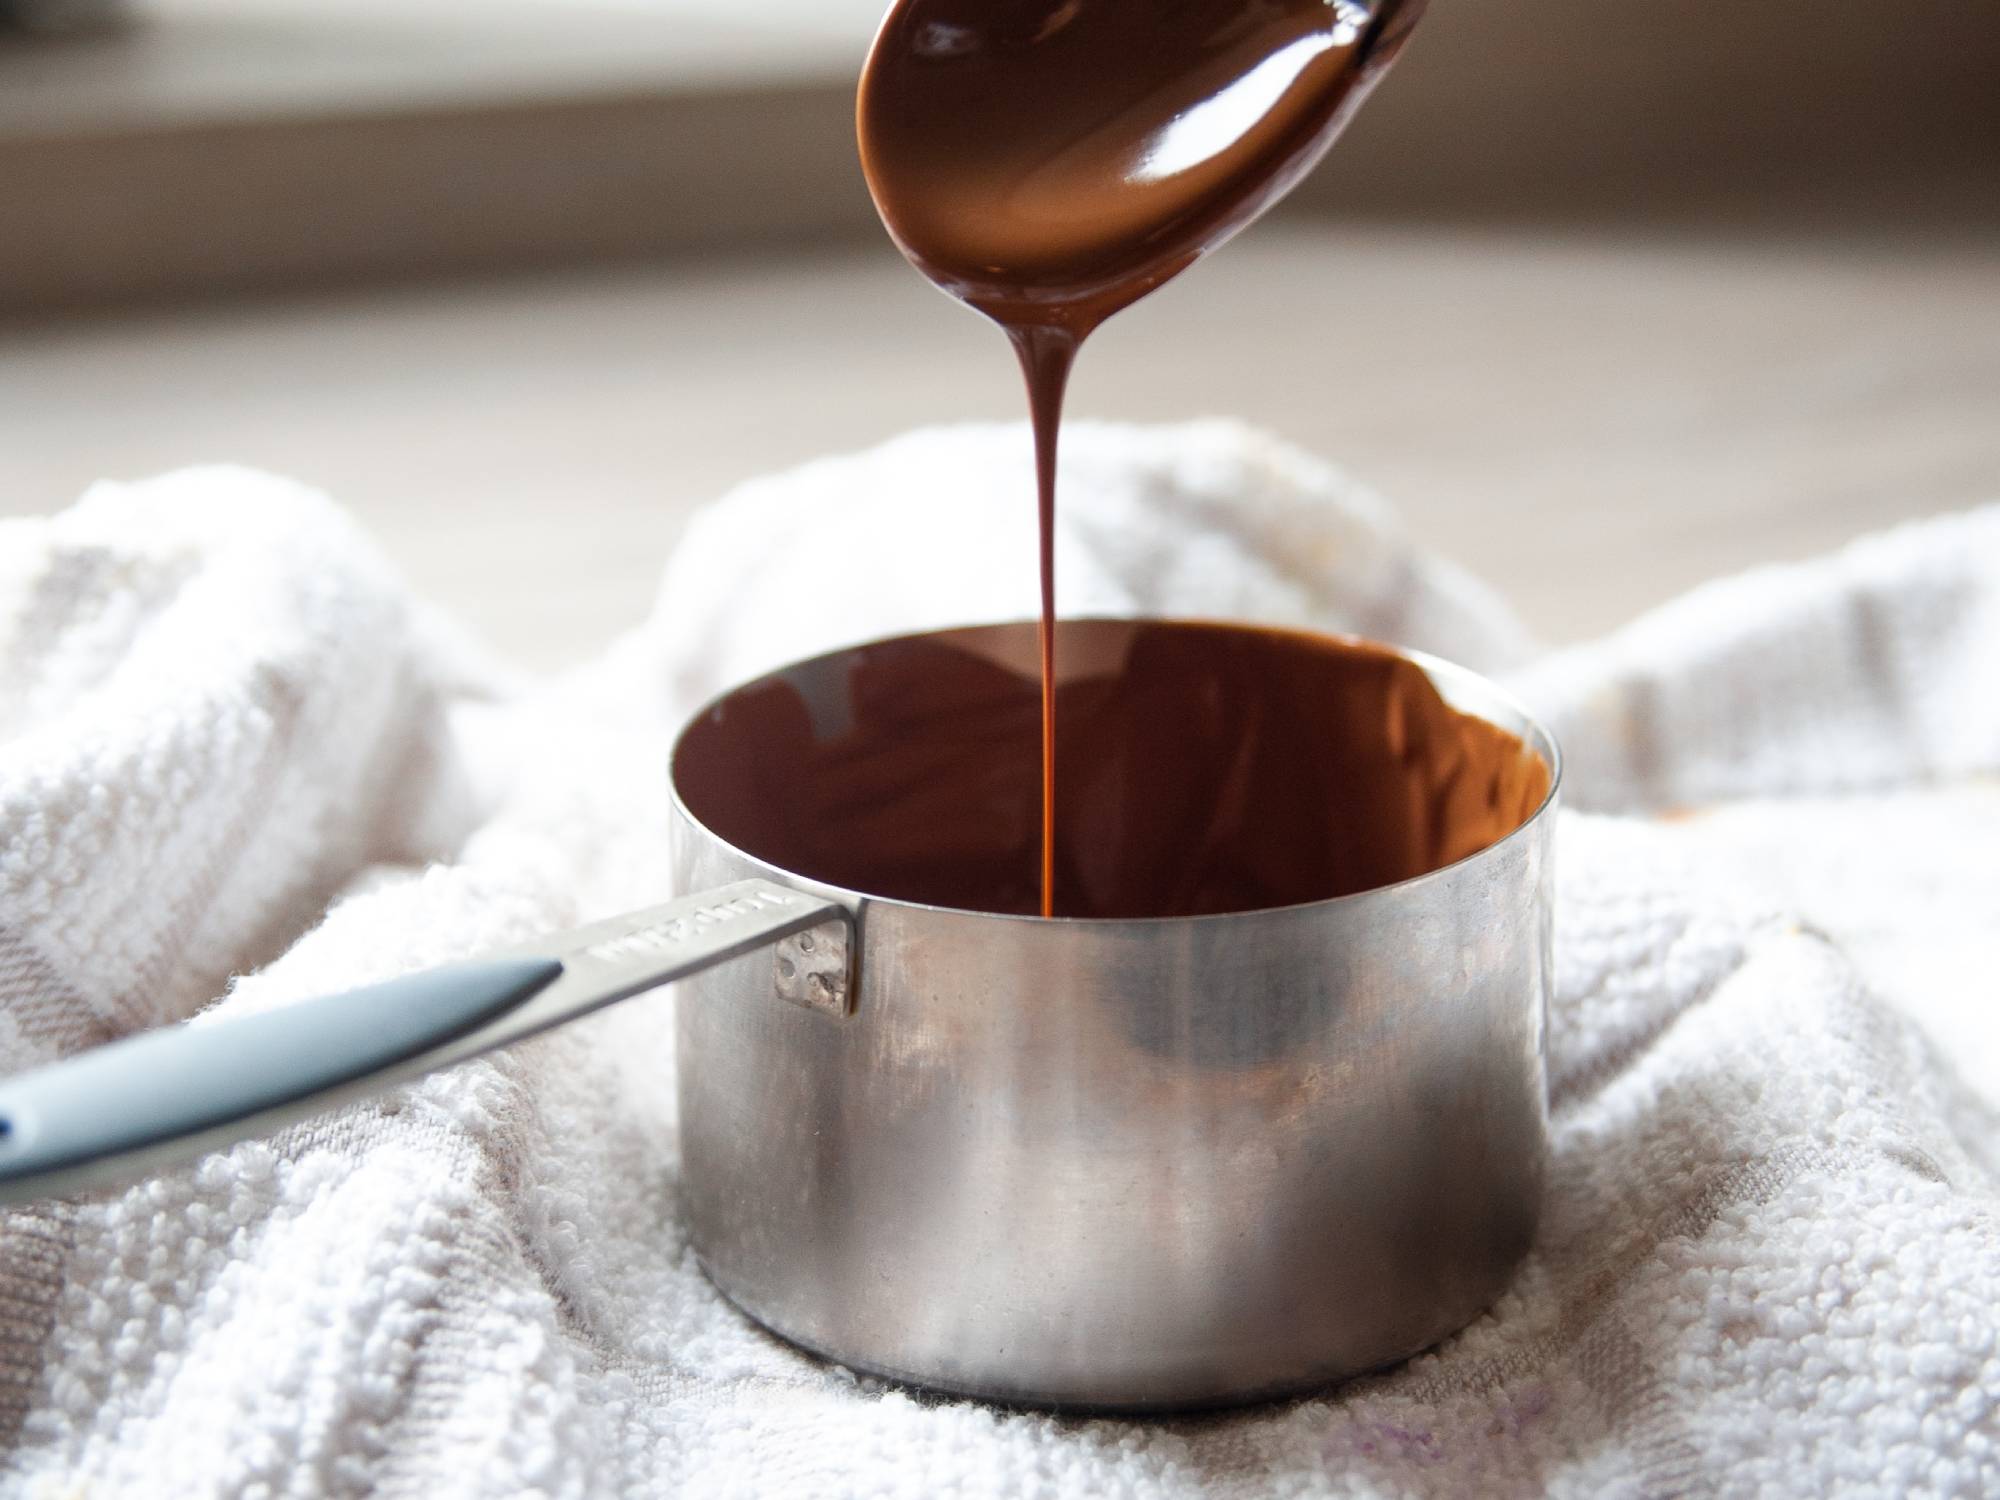 How to temper chocolate—even in hot weather